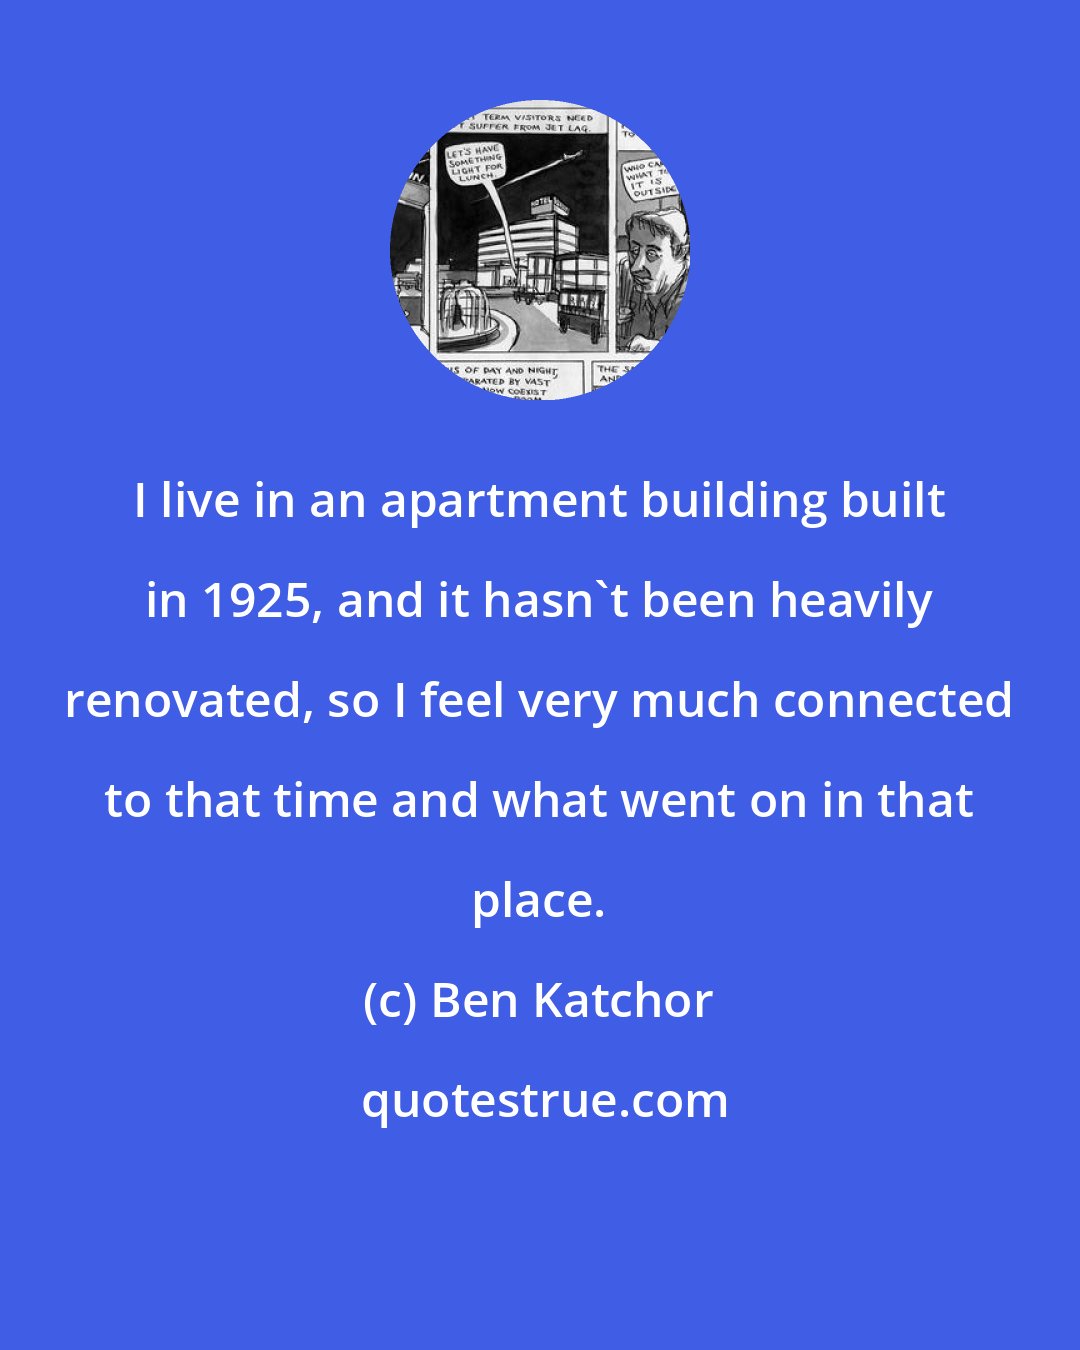 Ben Katchor: I live in an apartment building built in 1925, and it hasn't been heavily renovated, so I feel very much connected to that time and what went on in that place.